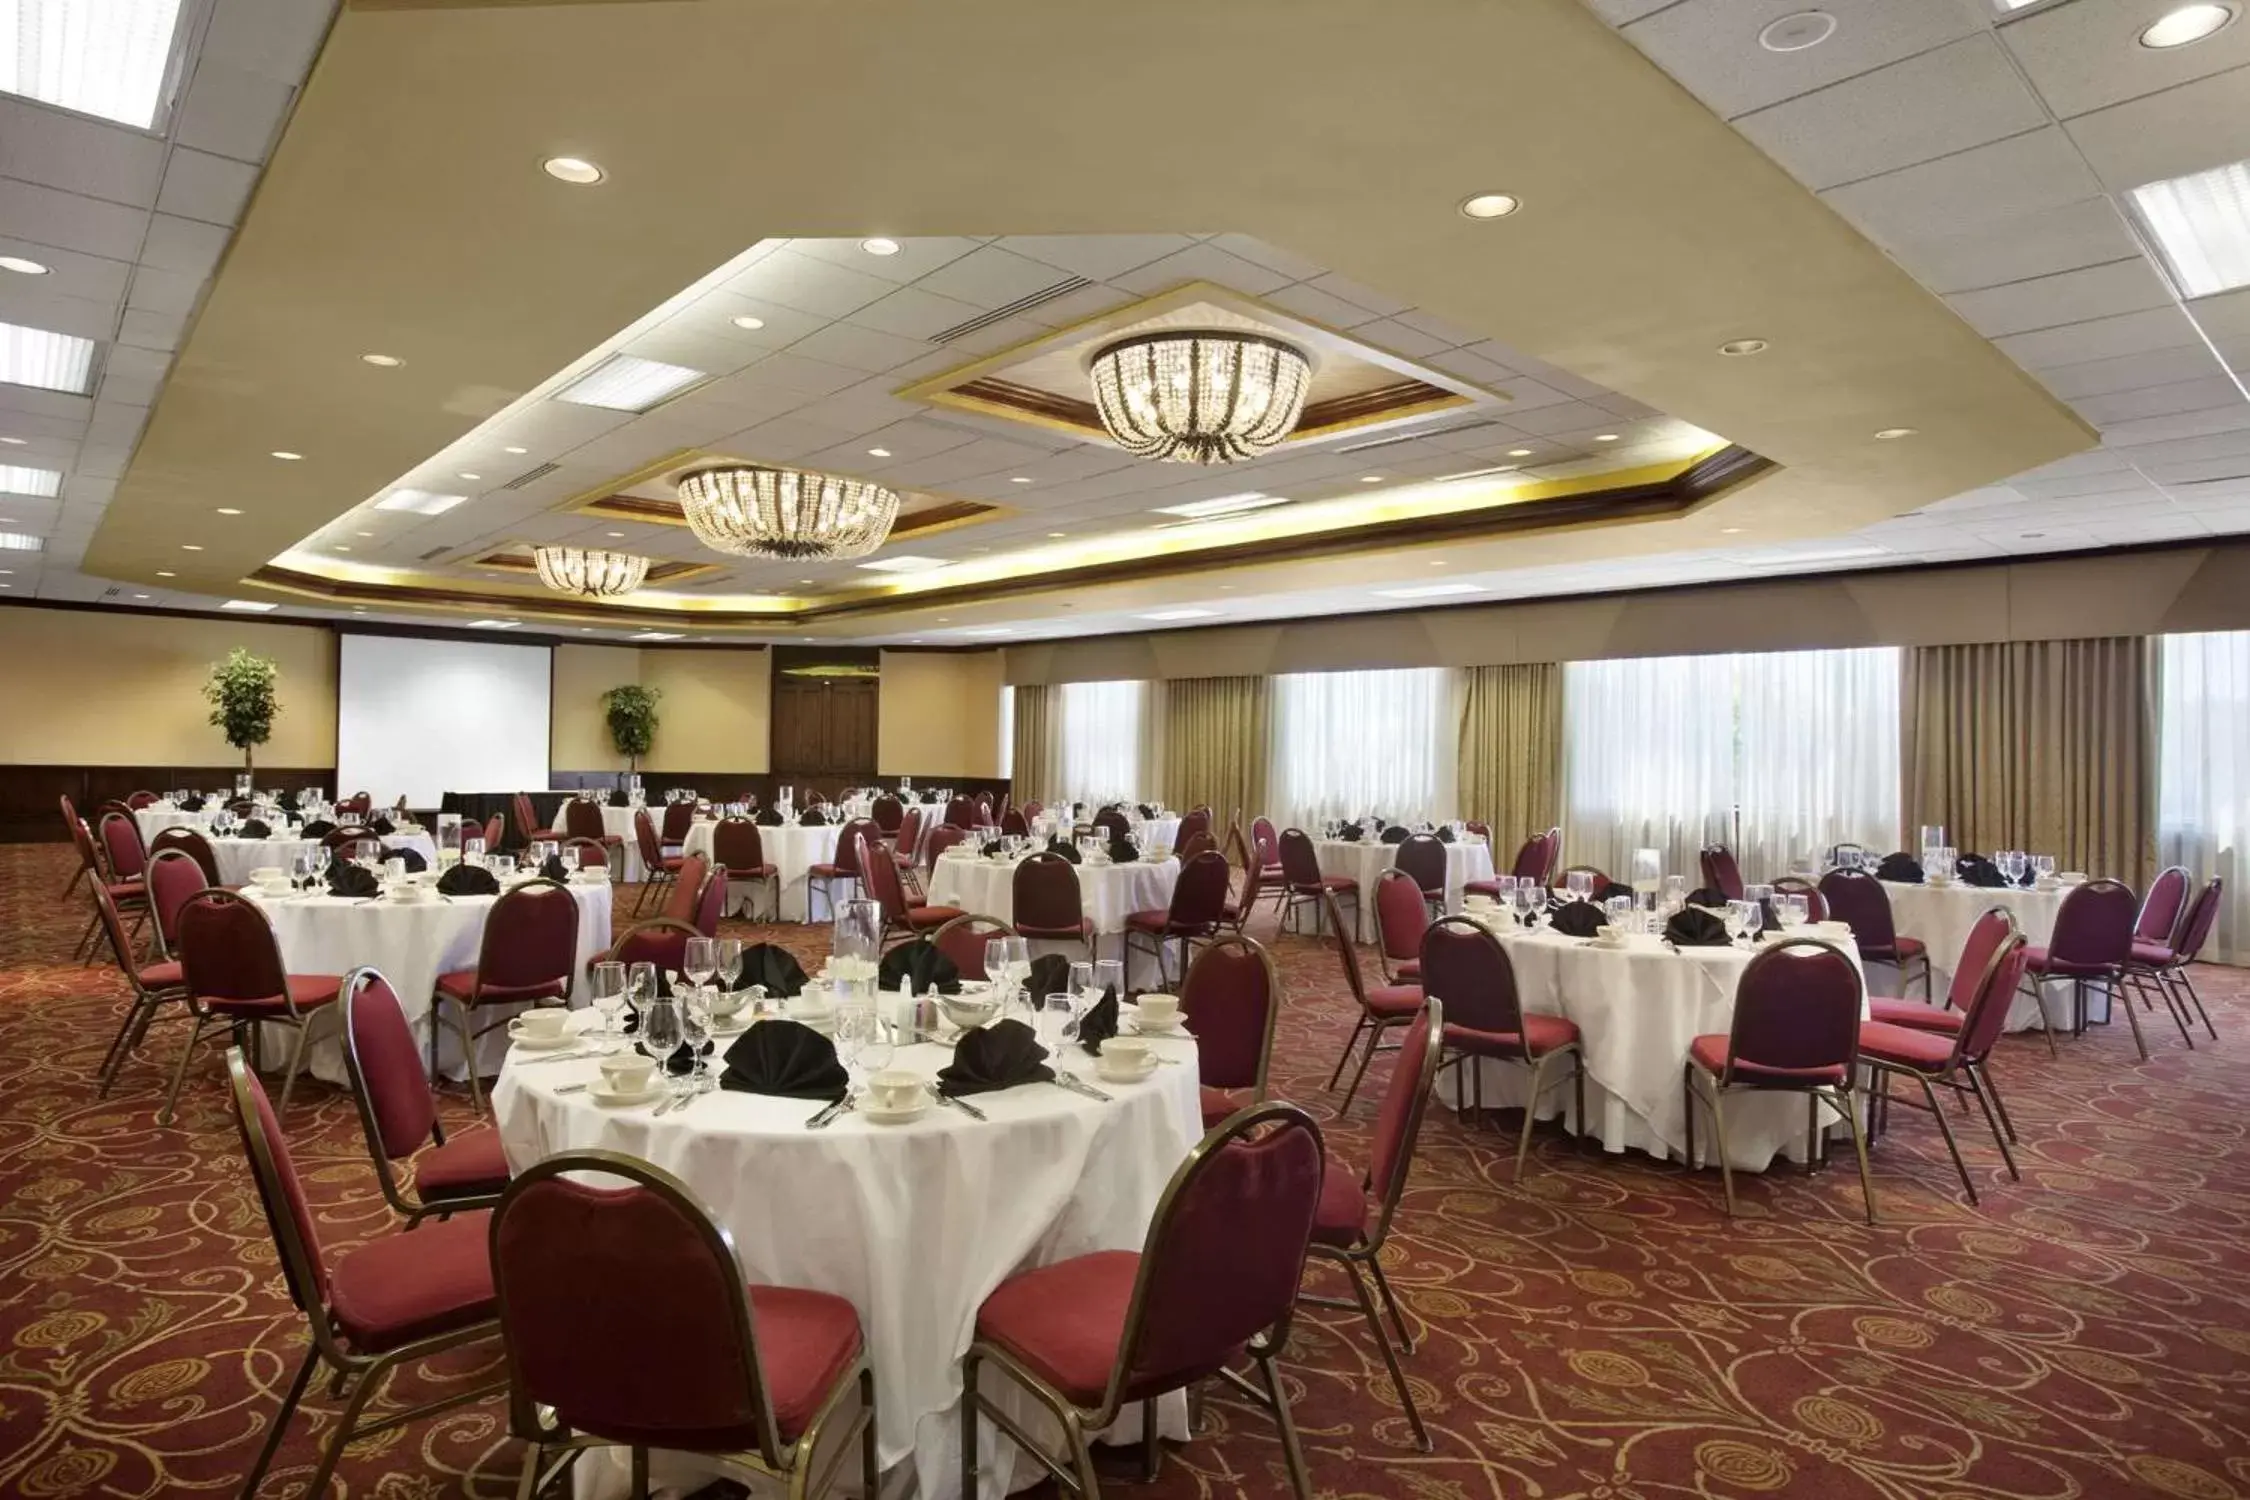 Meeting/conference room, Banquet Facilities in Embassy Suites by Hilton Columbia Greystone